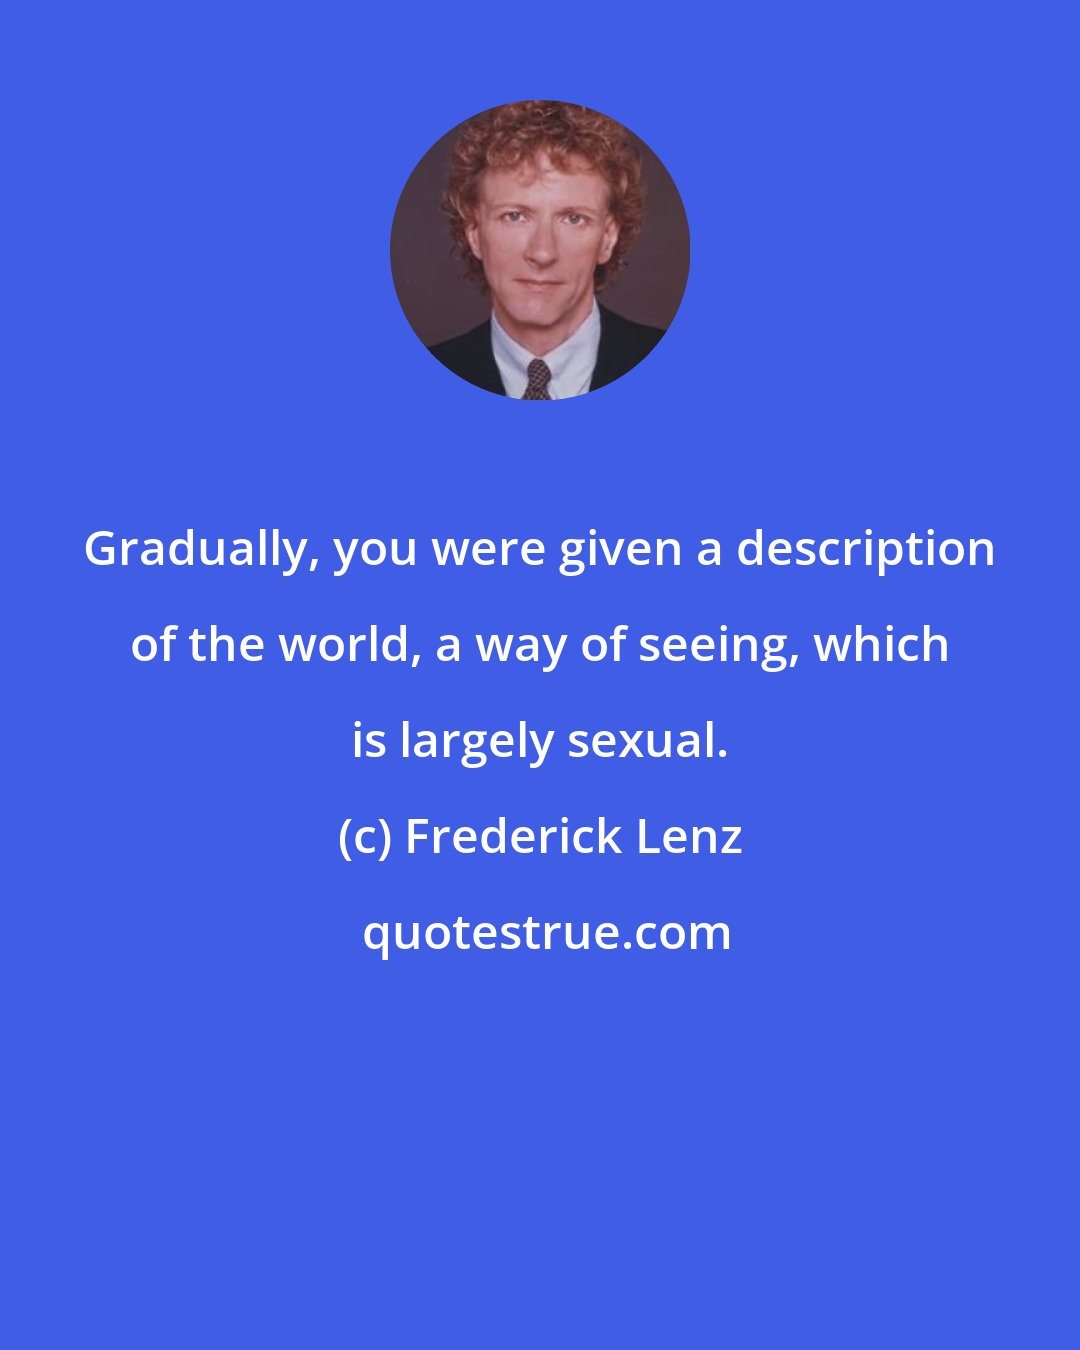 Frederick Lenz: Gradually, you were given a description of the world, a way of seeing, which is largely sexual.